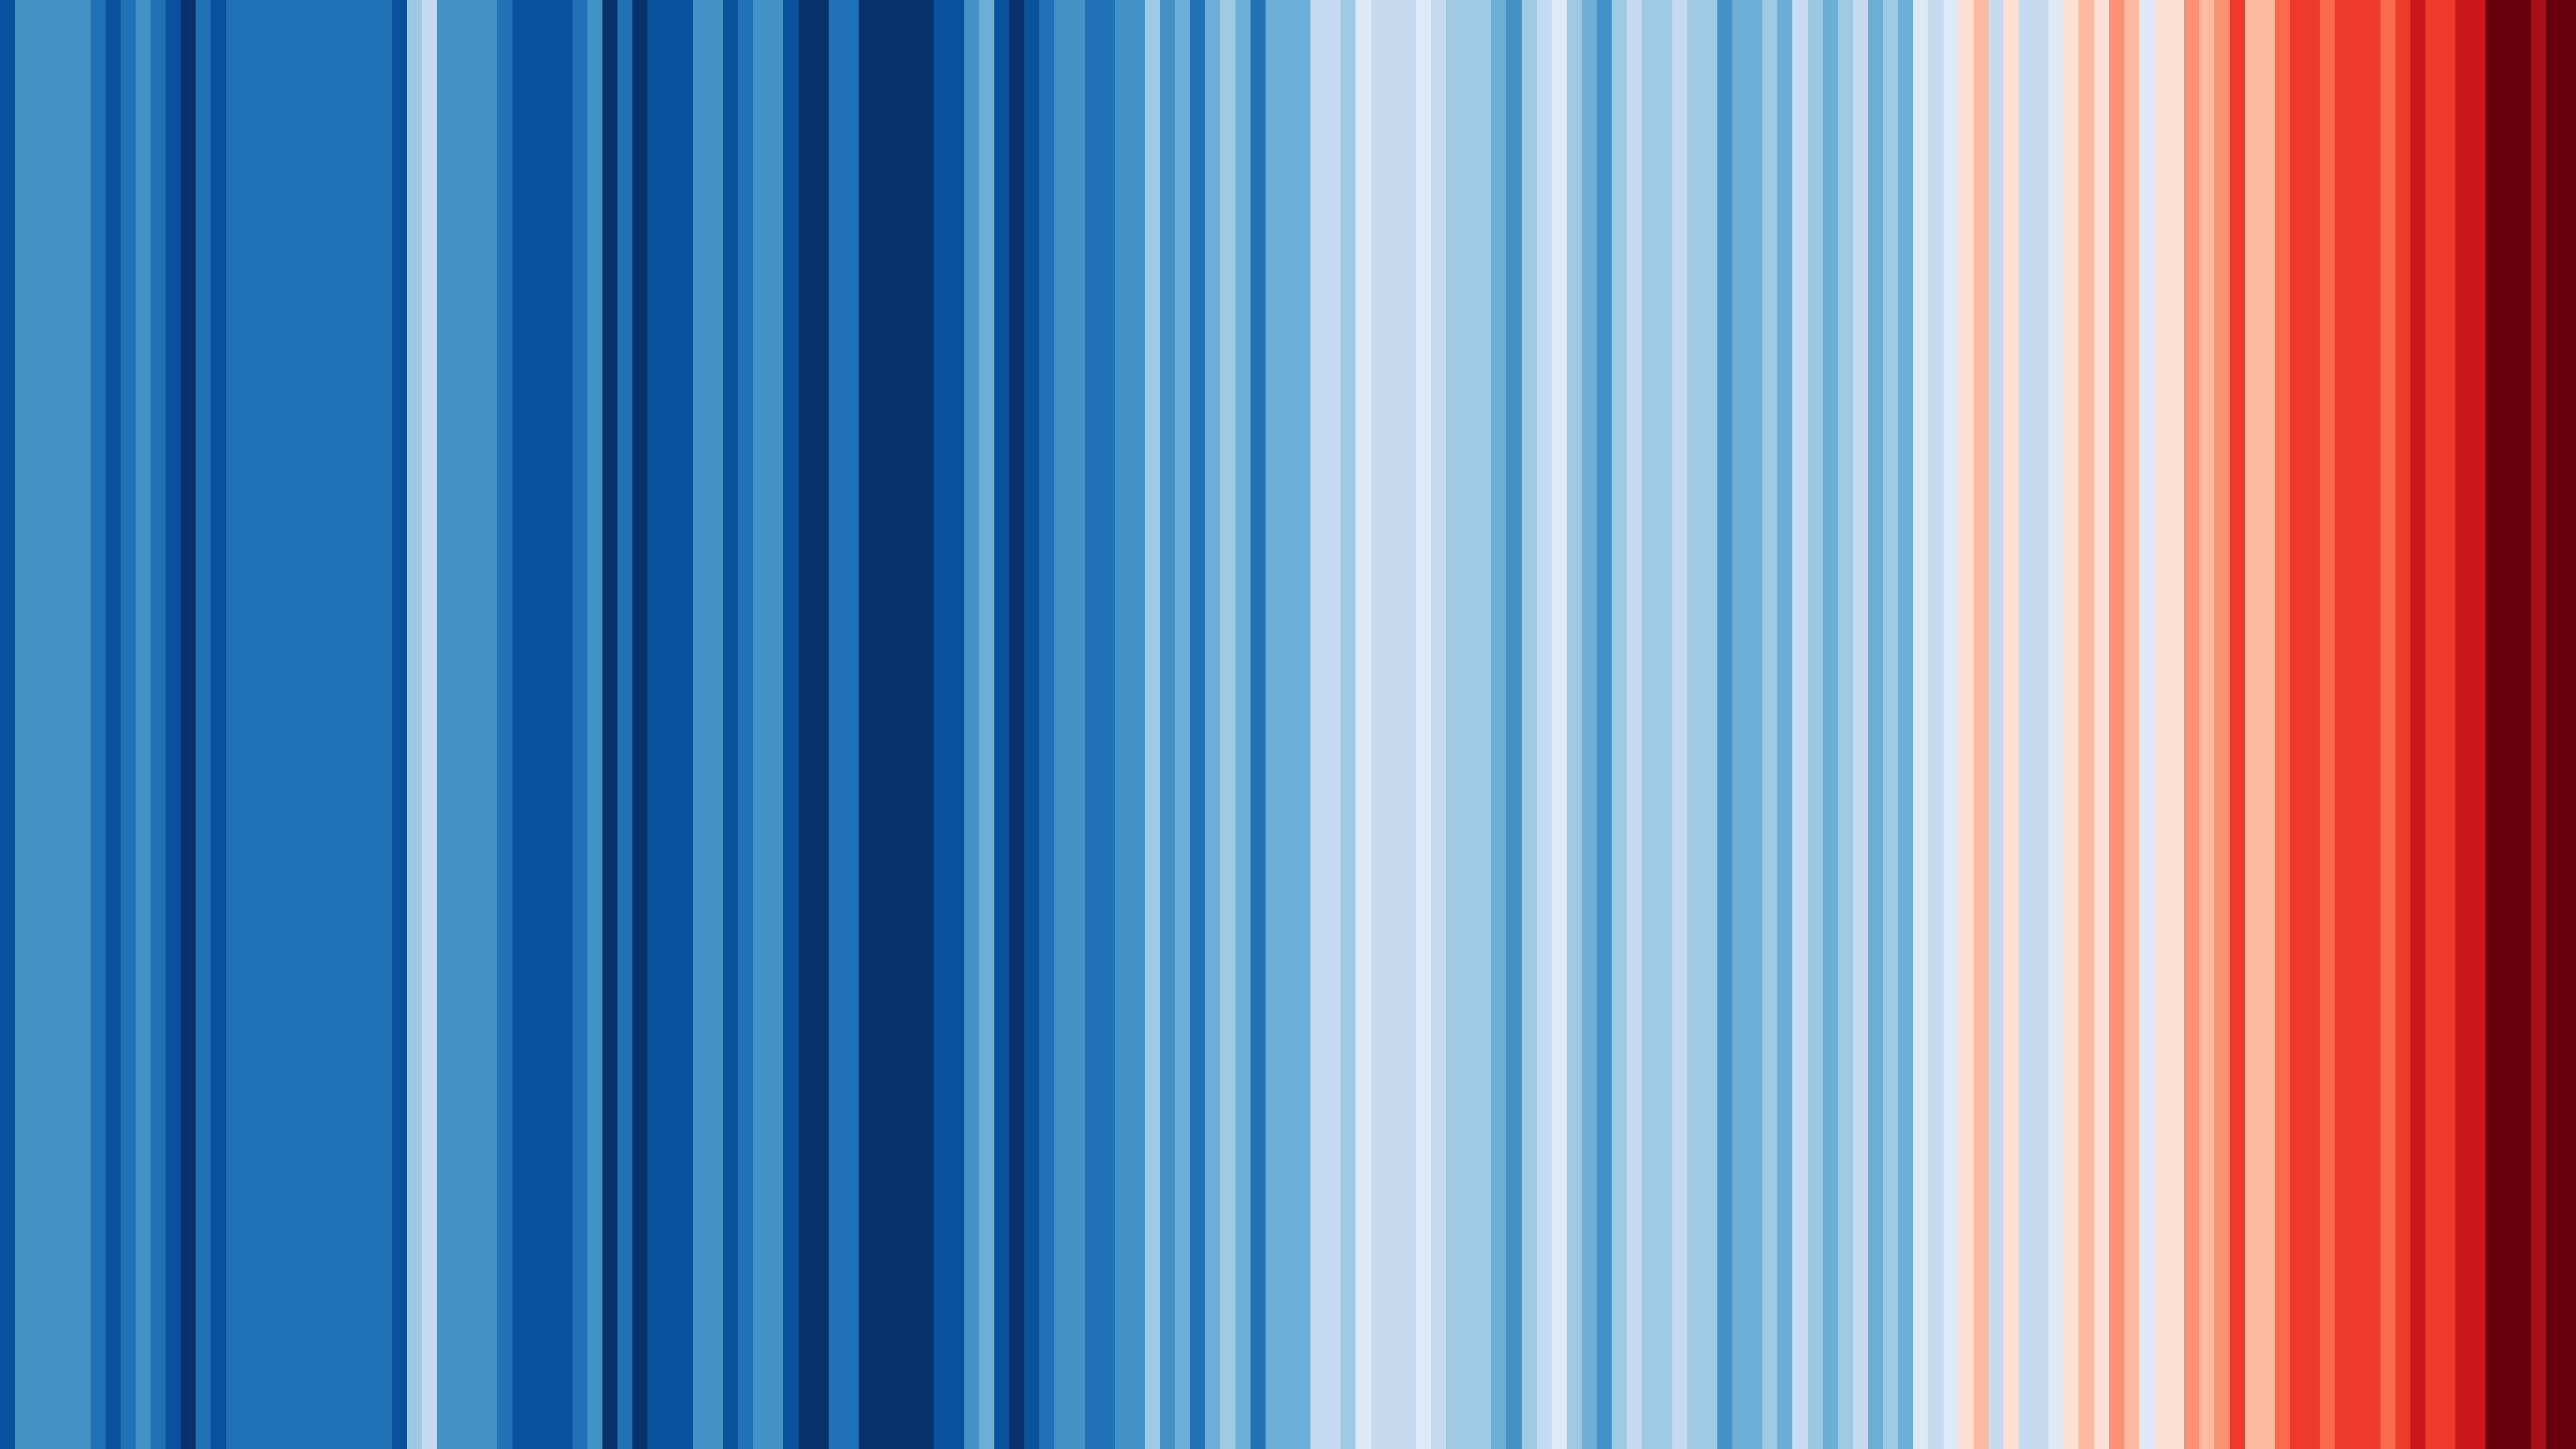 Warming Stripes symbolize global heating during the last Century 